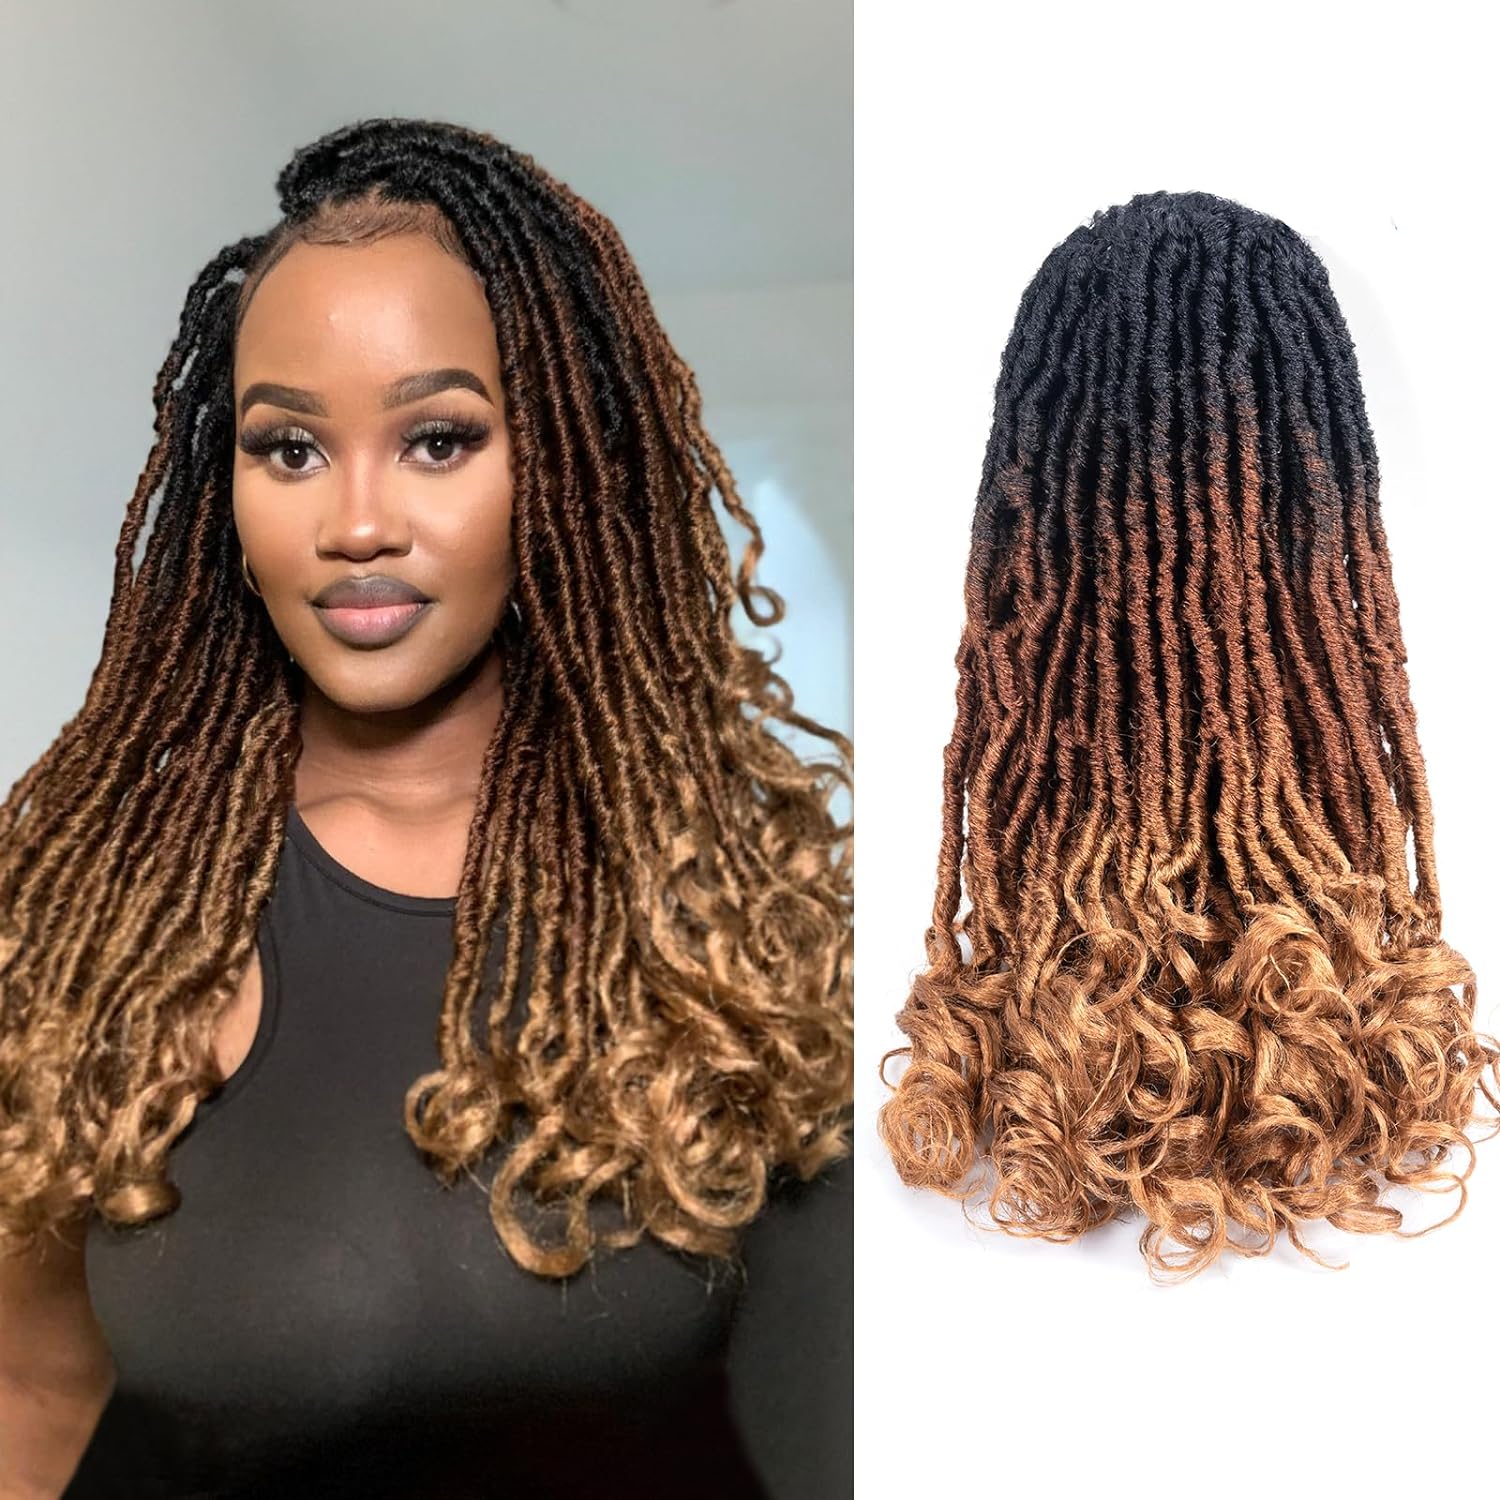 FAST SHIPPING 3-5 DAY FC | Toyotress French Curl Locs Crochet Hair Curly Faux Locs 8 Packs Black Pre-Looped Crochet Hair with Curly ends Crochet Hair with Soft Curly Wave Ends Hair Extensions